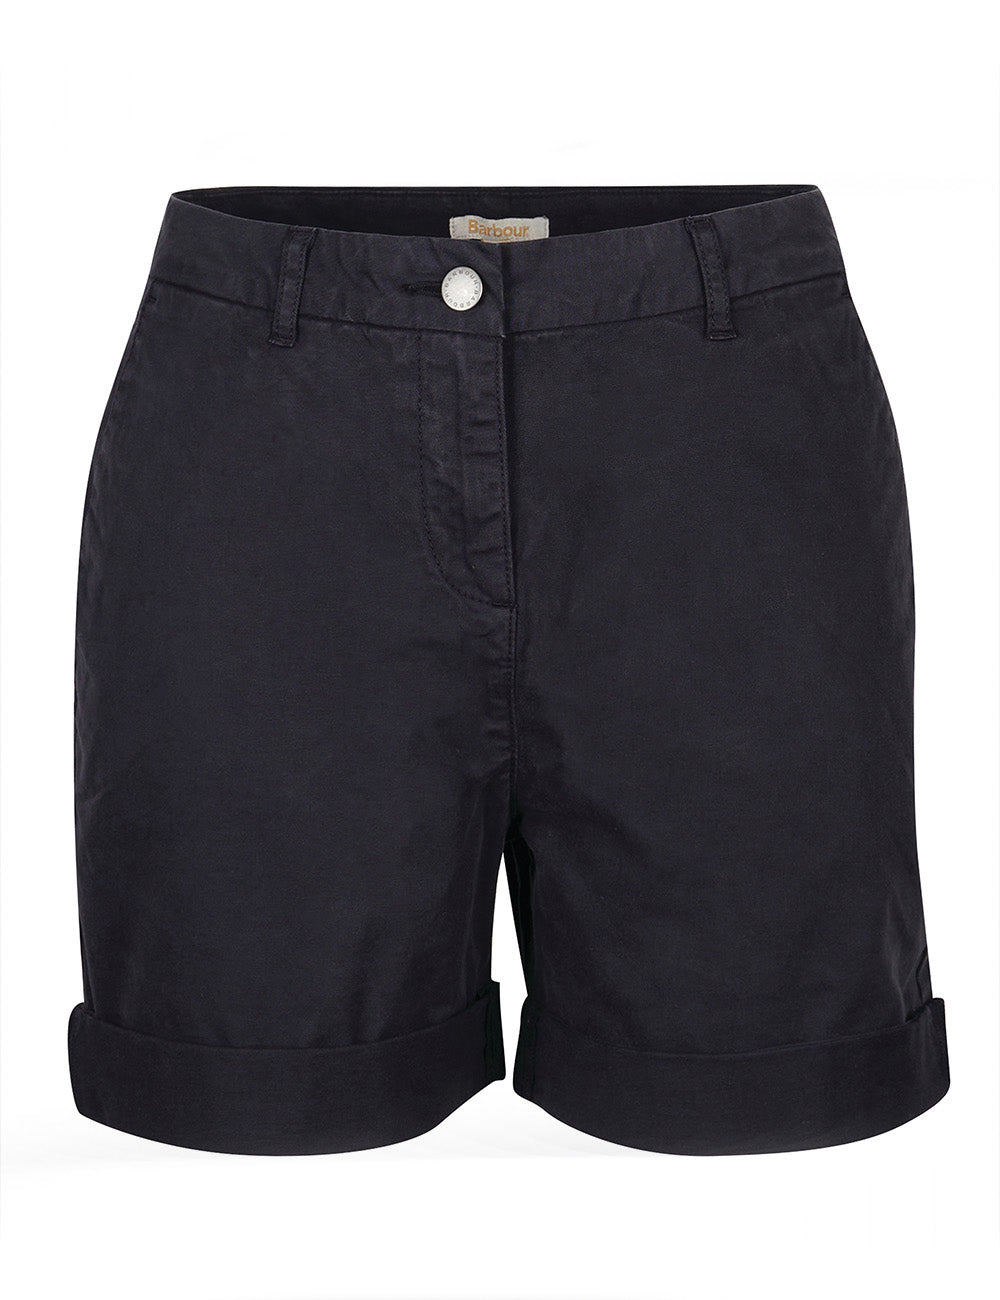 Barbour Chino Shorts - Navy